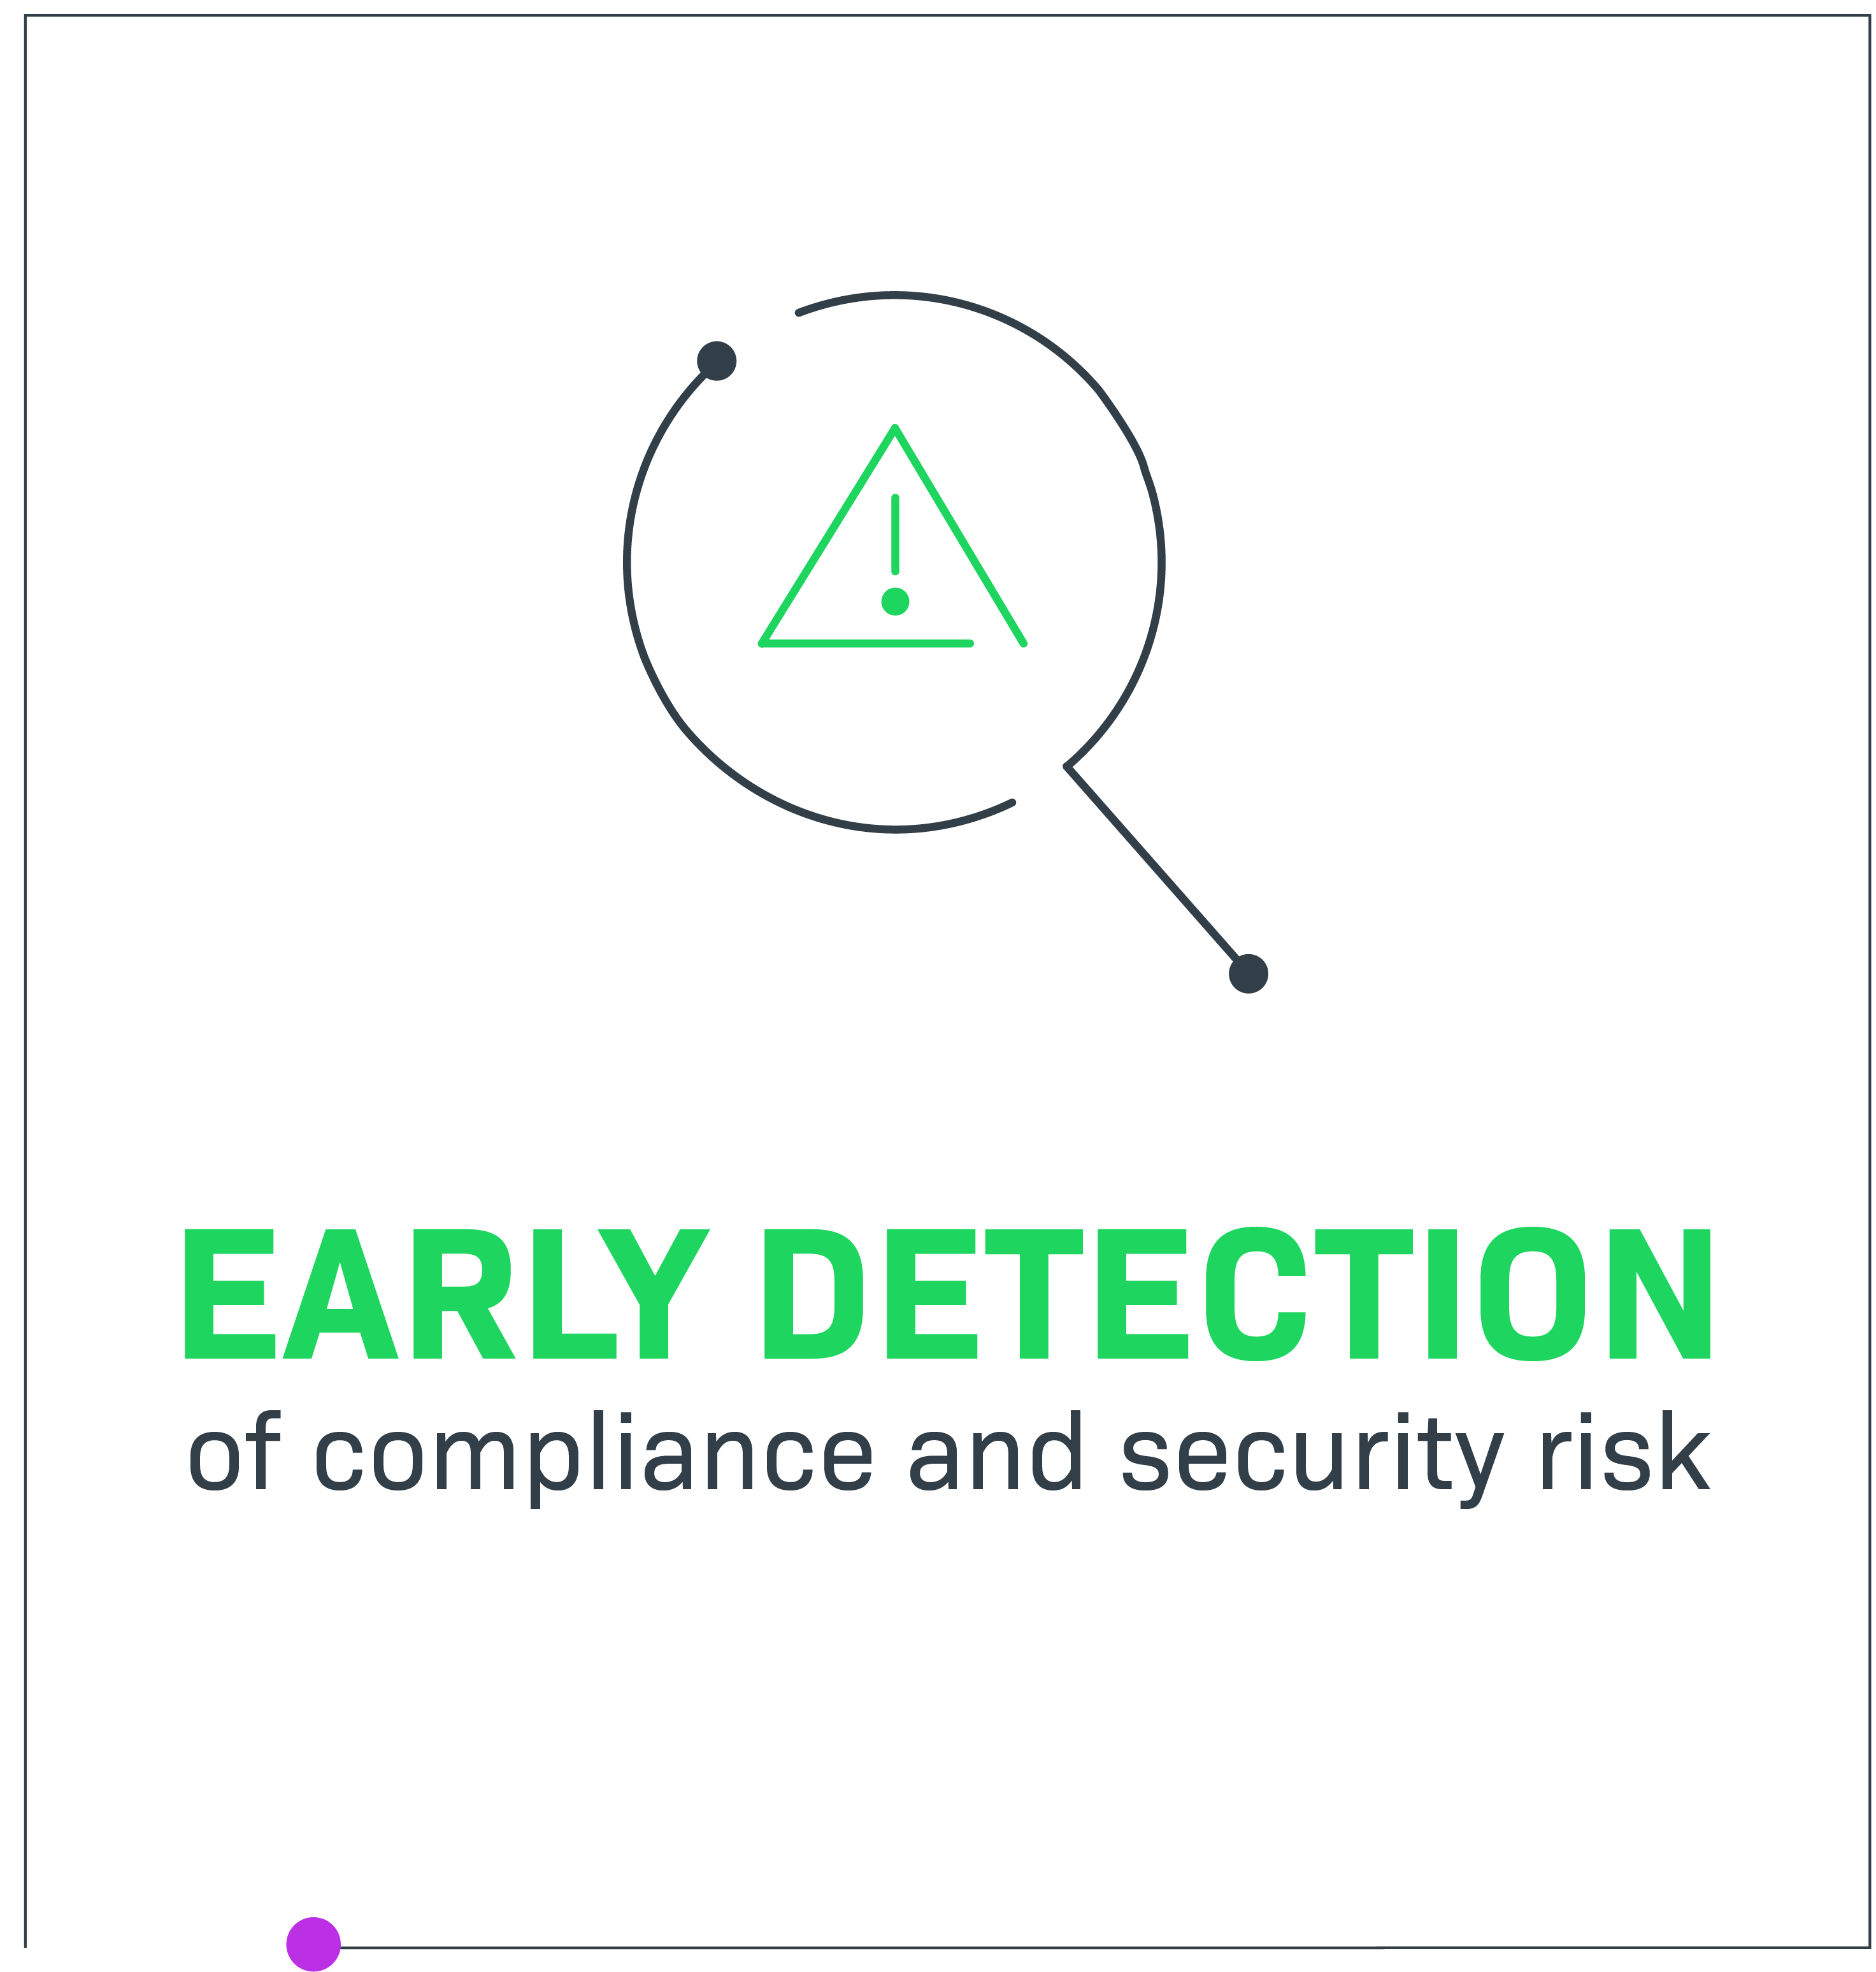 Early detection of compliance and security risk